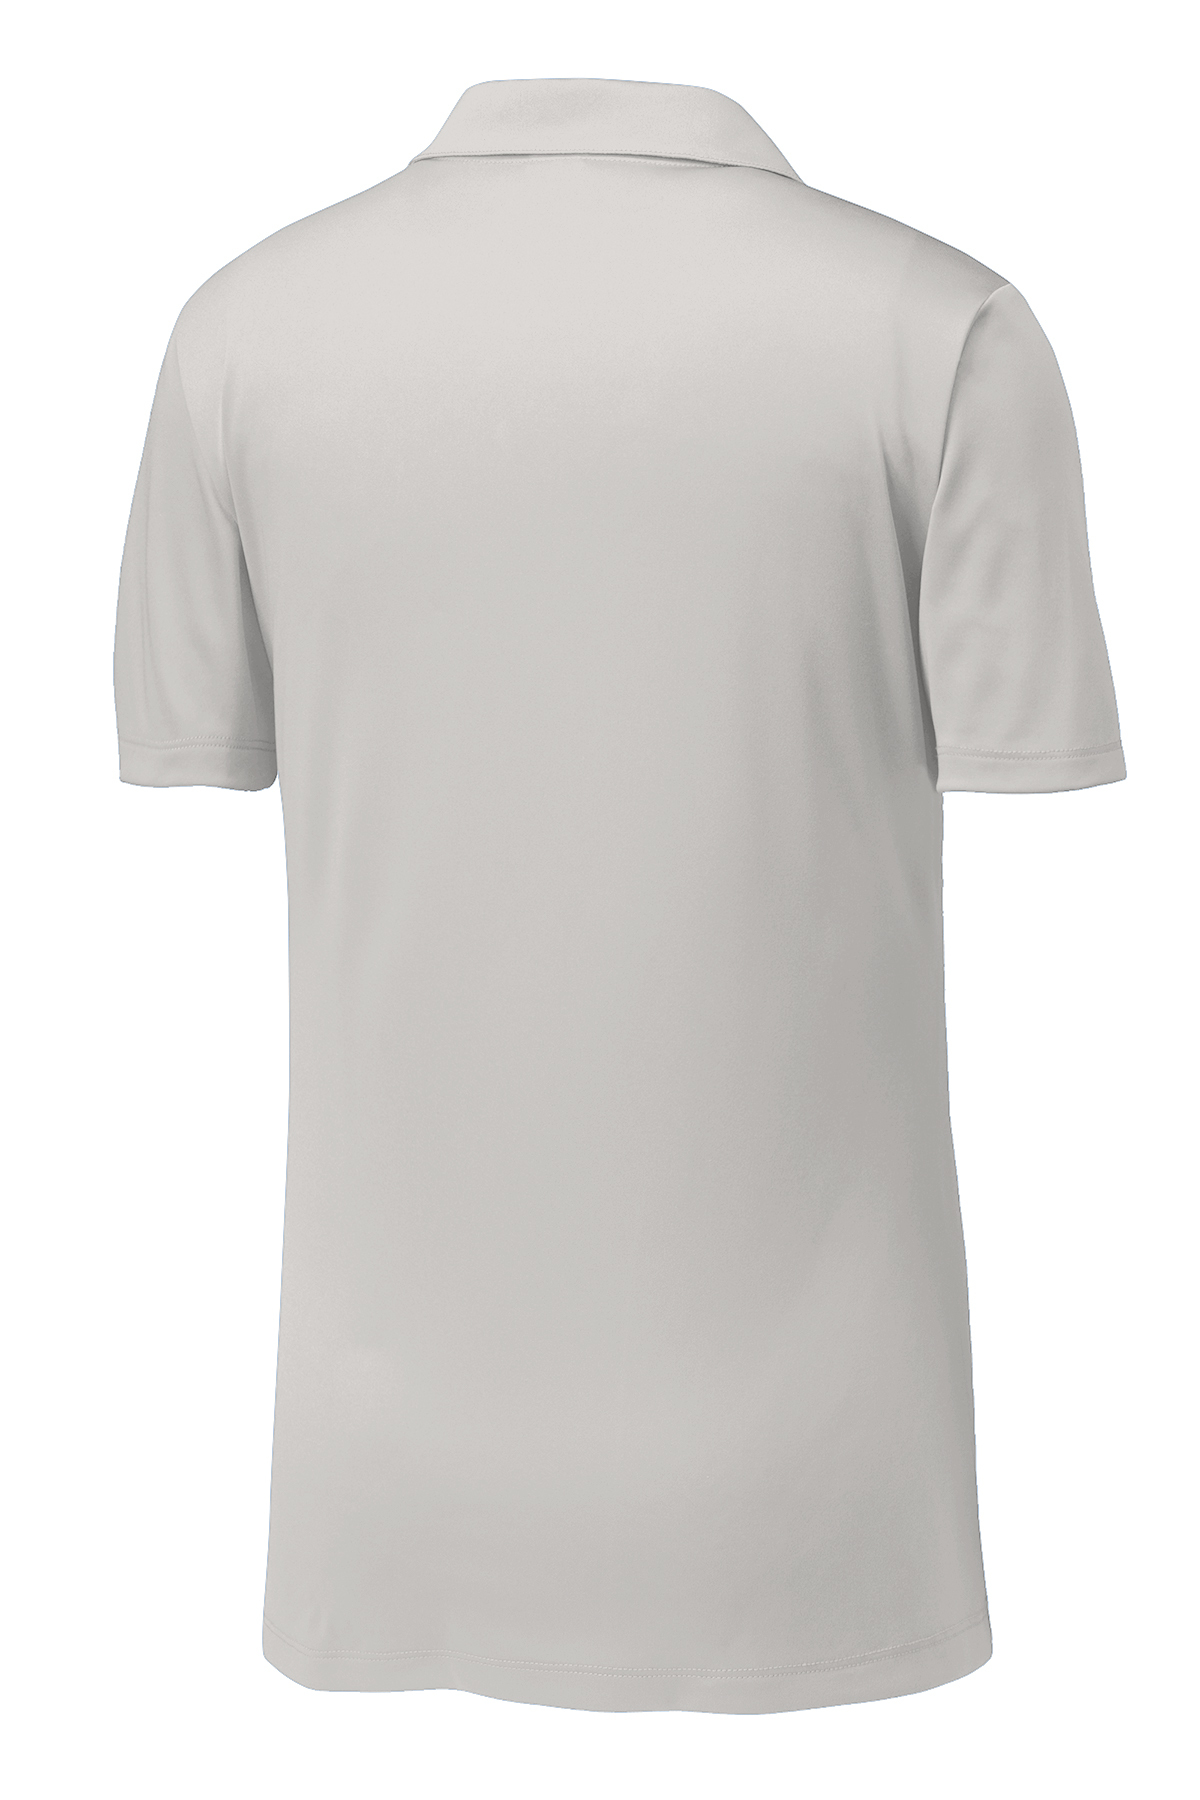 Sport-Tek PosiCharge Competitor Polo | Product | Company Casuals